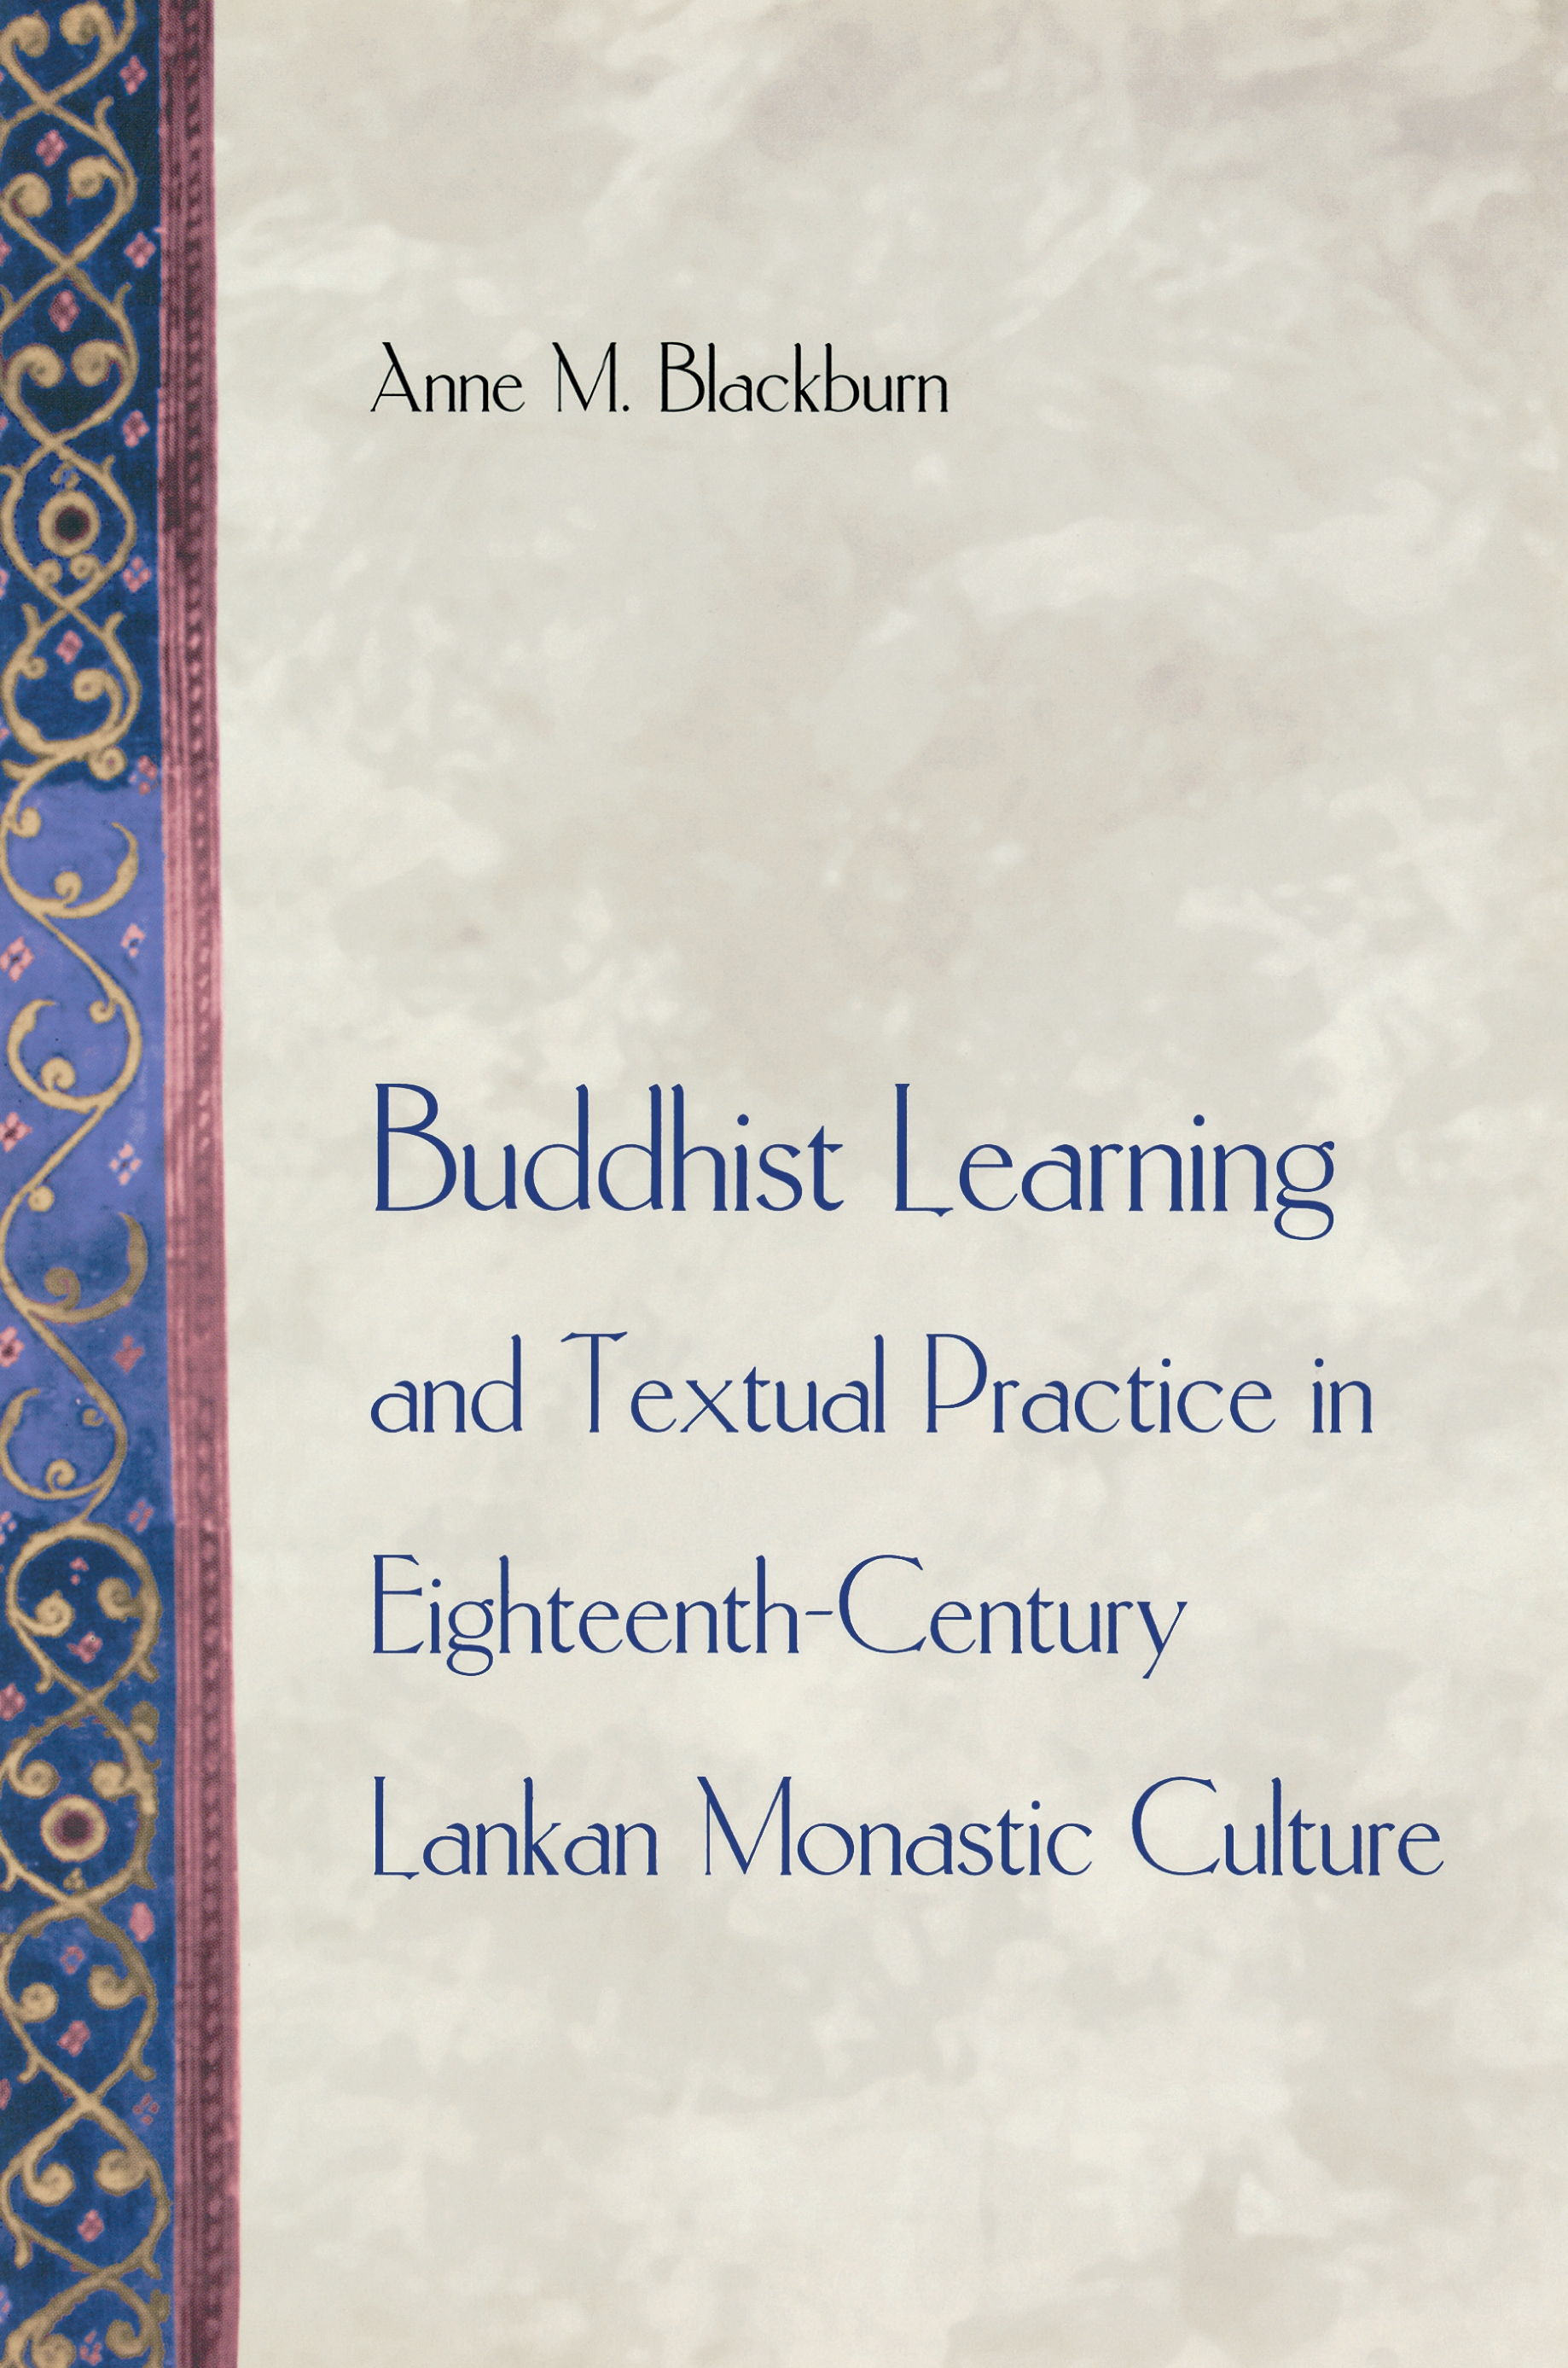 Buddhist Learning and Textual Practice in Eighteeth - Century Lankan Monastic Culture